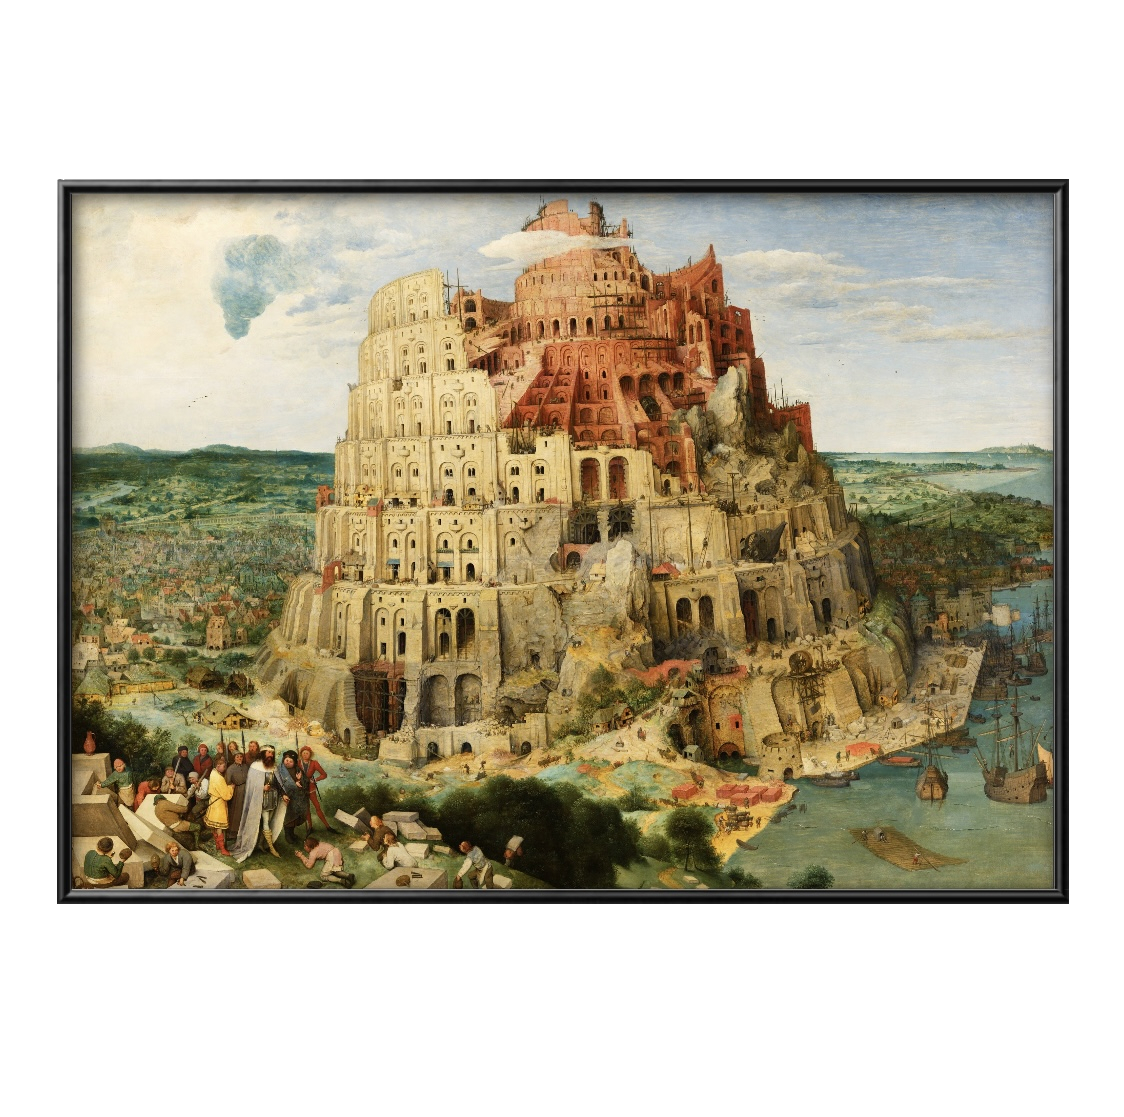 6780■Free shipping!! Art poster painting A3 size Pieter Bruegel Tower of Babel illustration design Nordic matte paper, Housing, interior, others